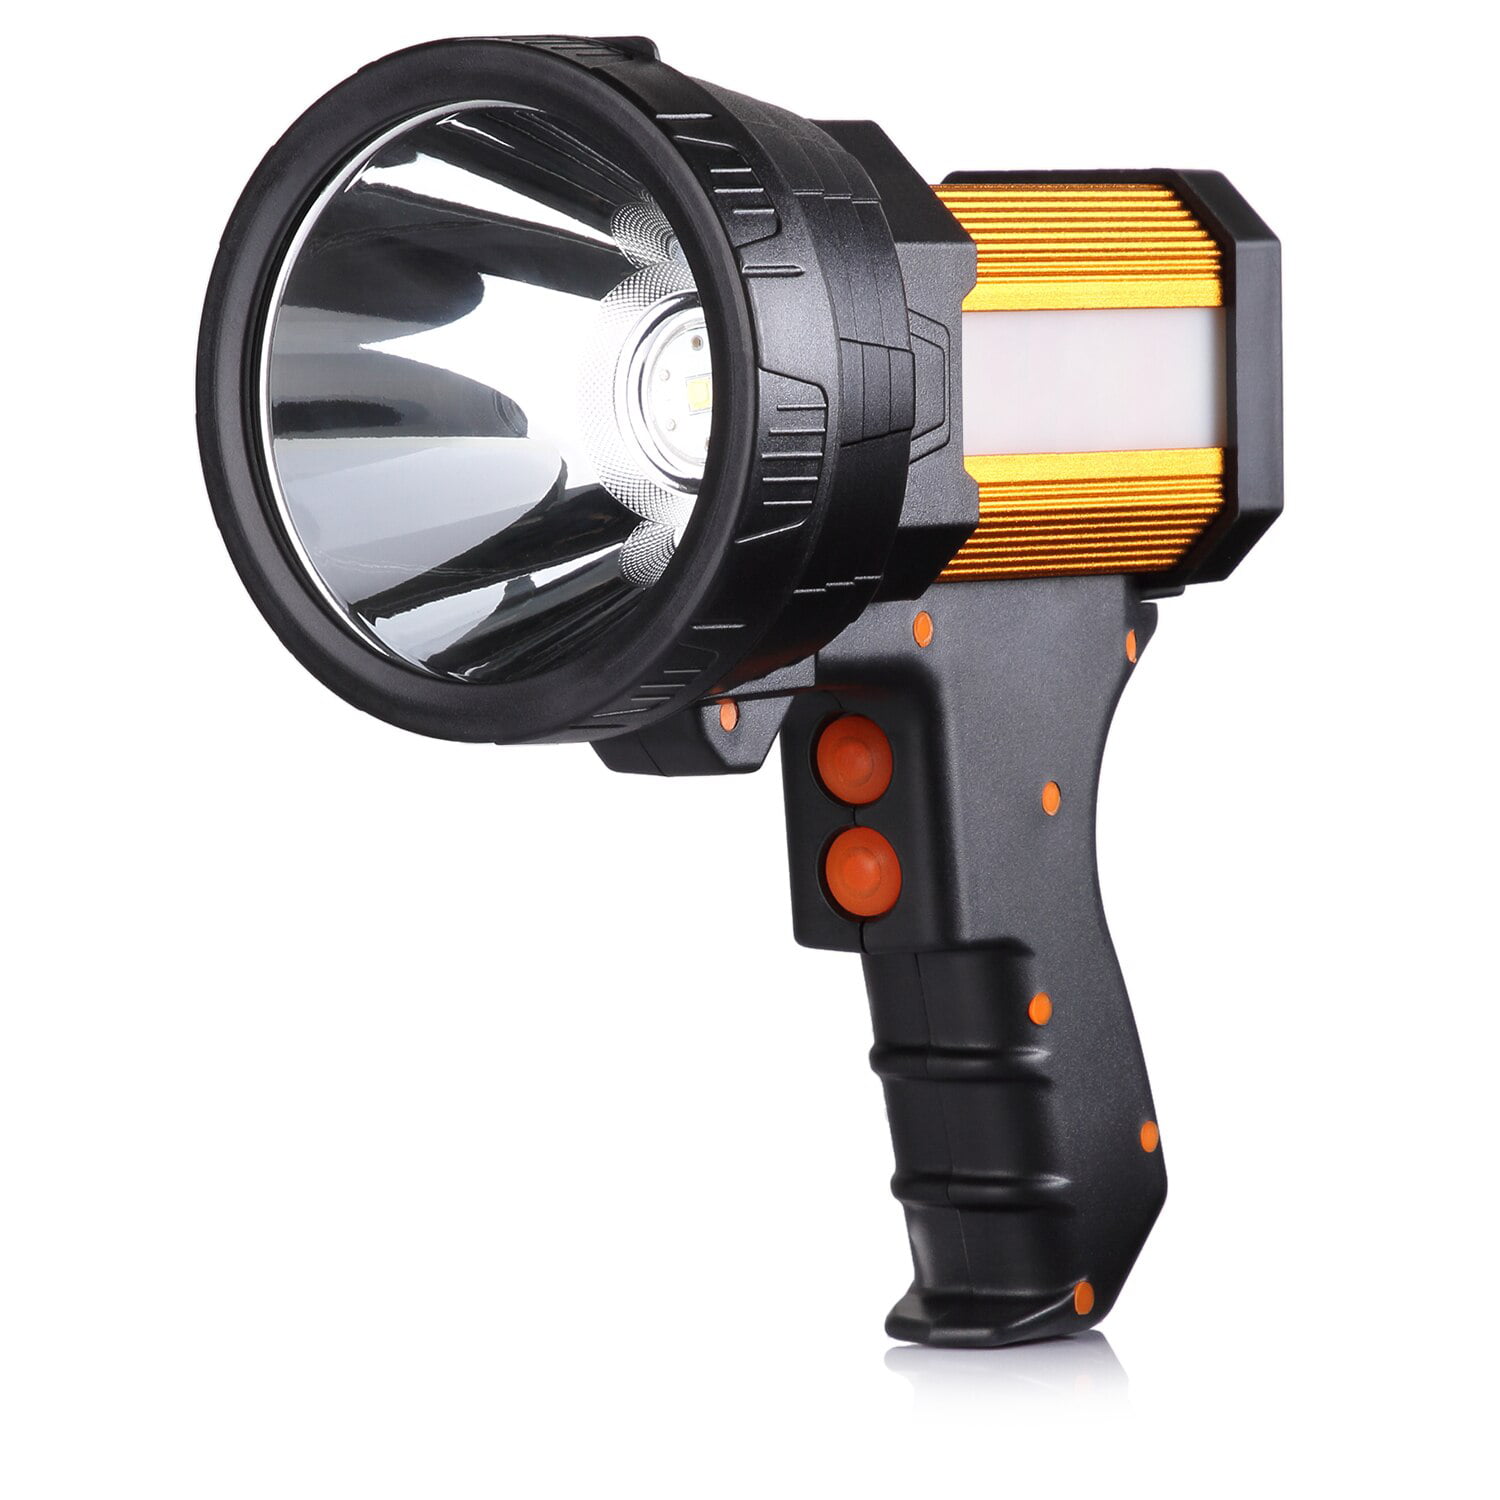 10 Black and Clear LED Rechargeable Handheld Spot Light